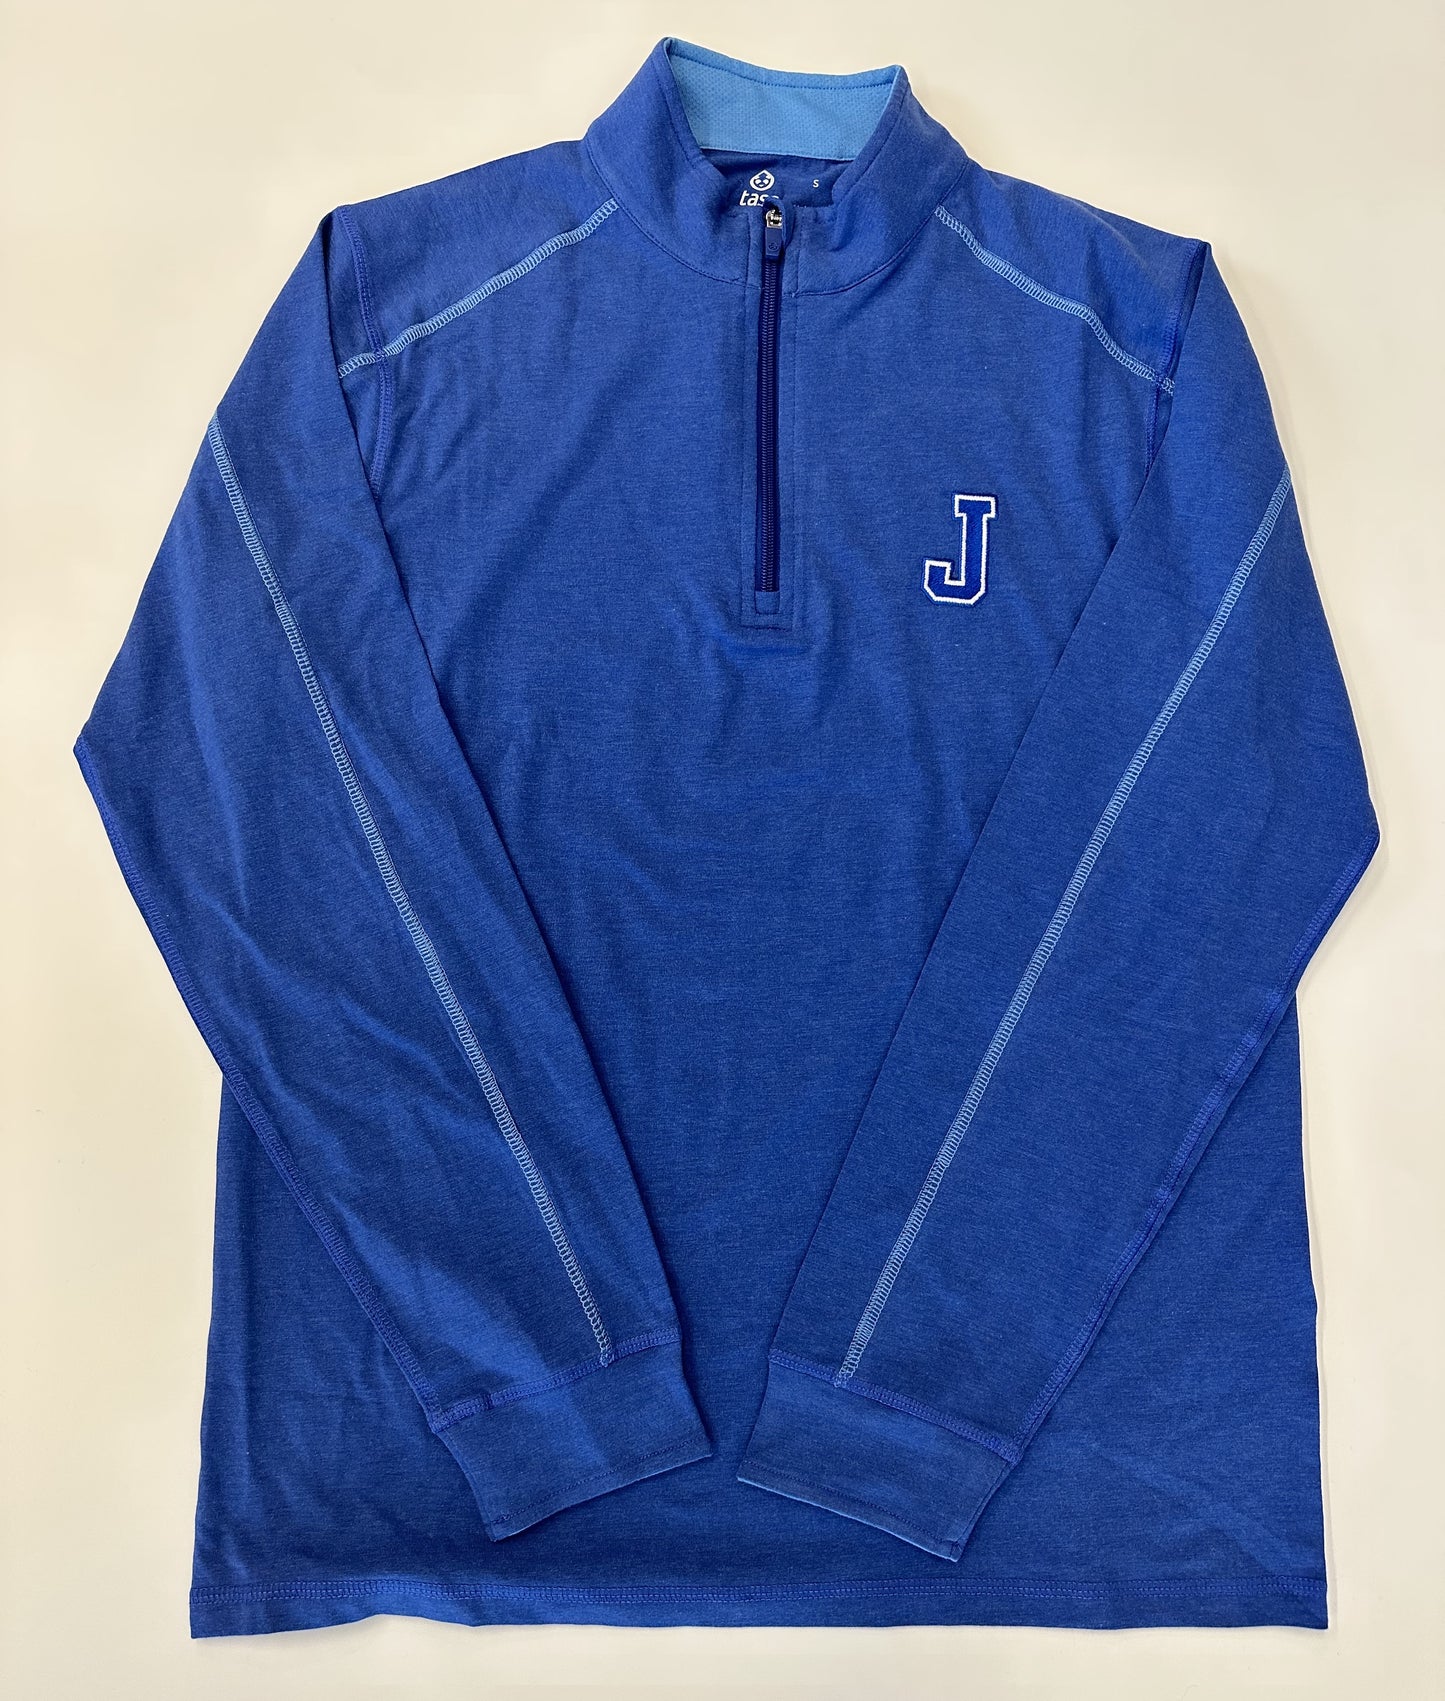 Tasc Performance.  51% Organic Cotton/41% Viscose from Bamboo/8% Lycra Spandex.  Lock down zipper with garage, contrast seaming, sleeve cuffs, 30" length.  Embroidered J logo.